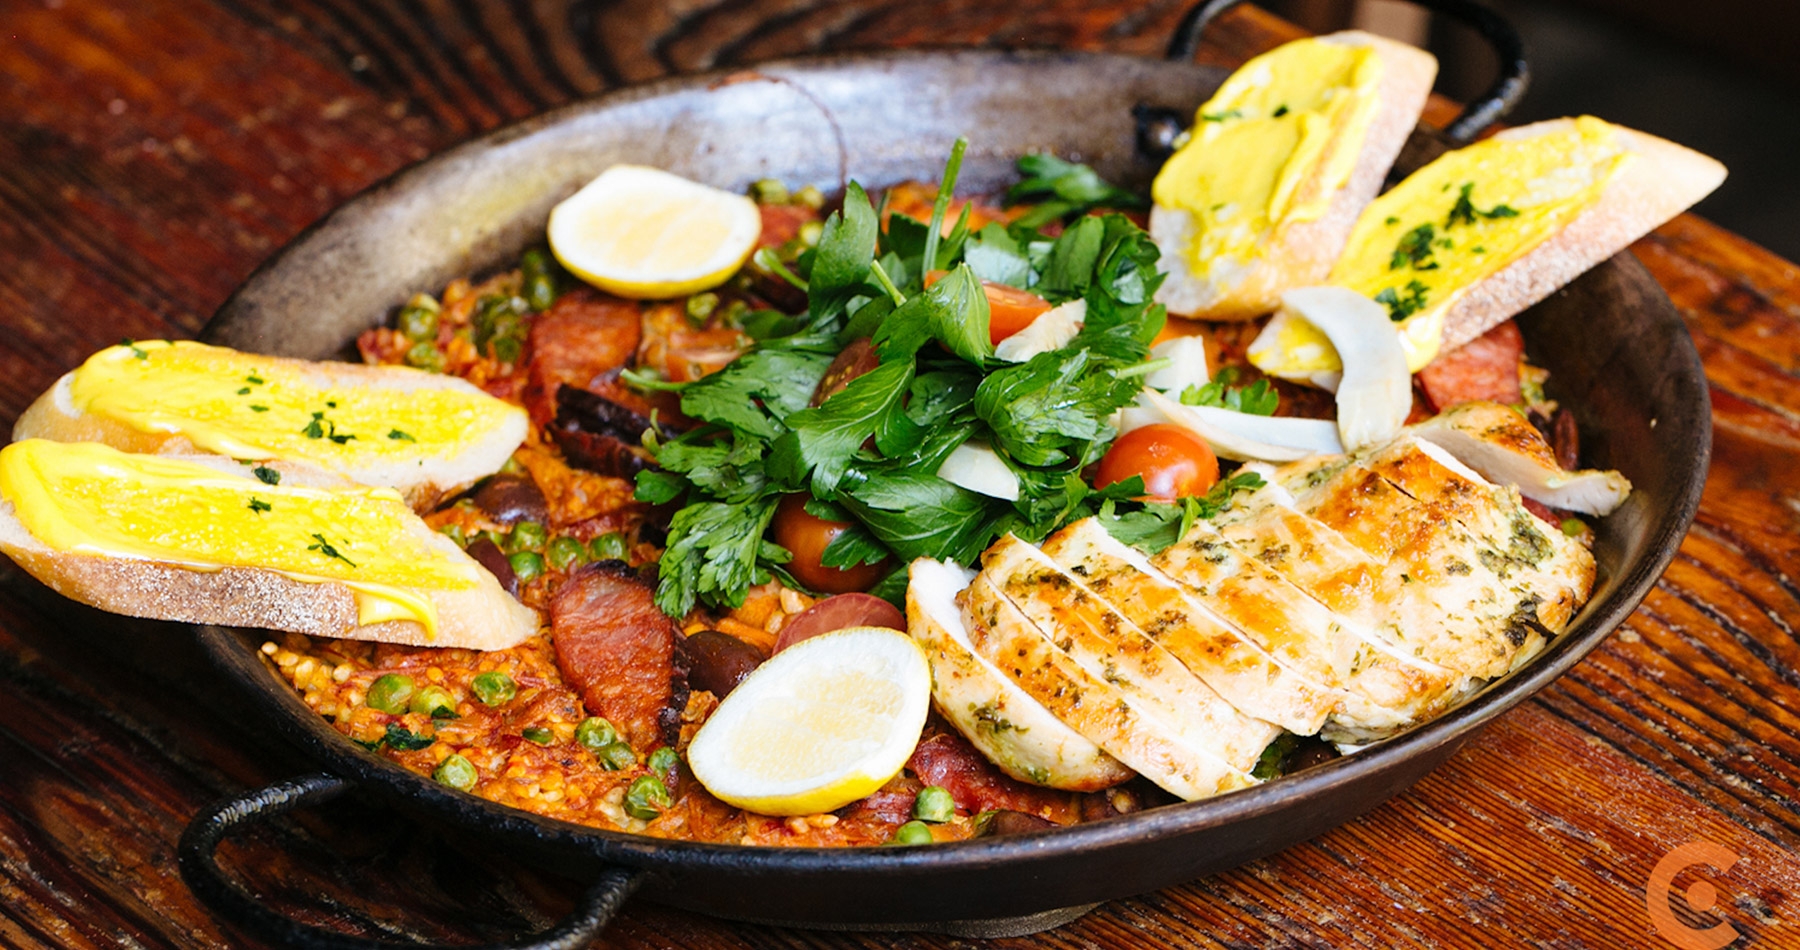 A metal paella dish filled with rice and topped with chicken, chorizo, tomatoes, greens, lemon wedges, and slices of bread.